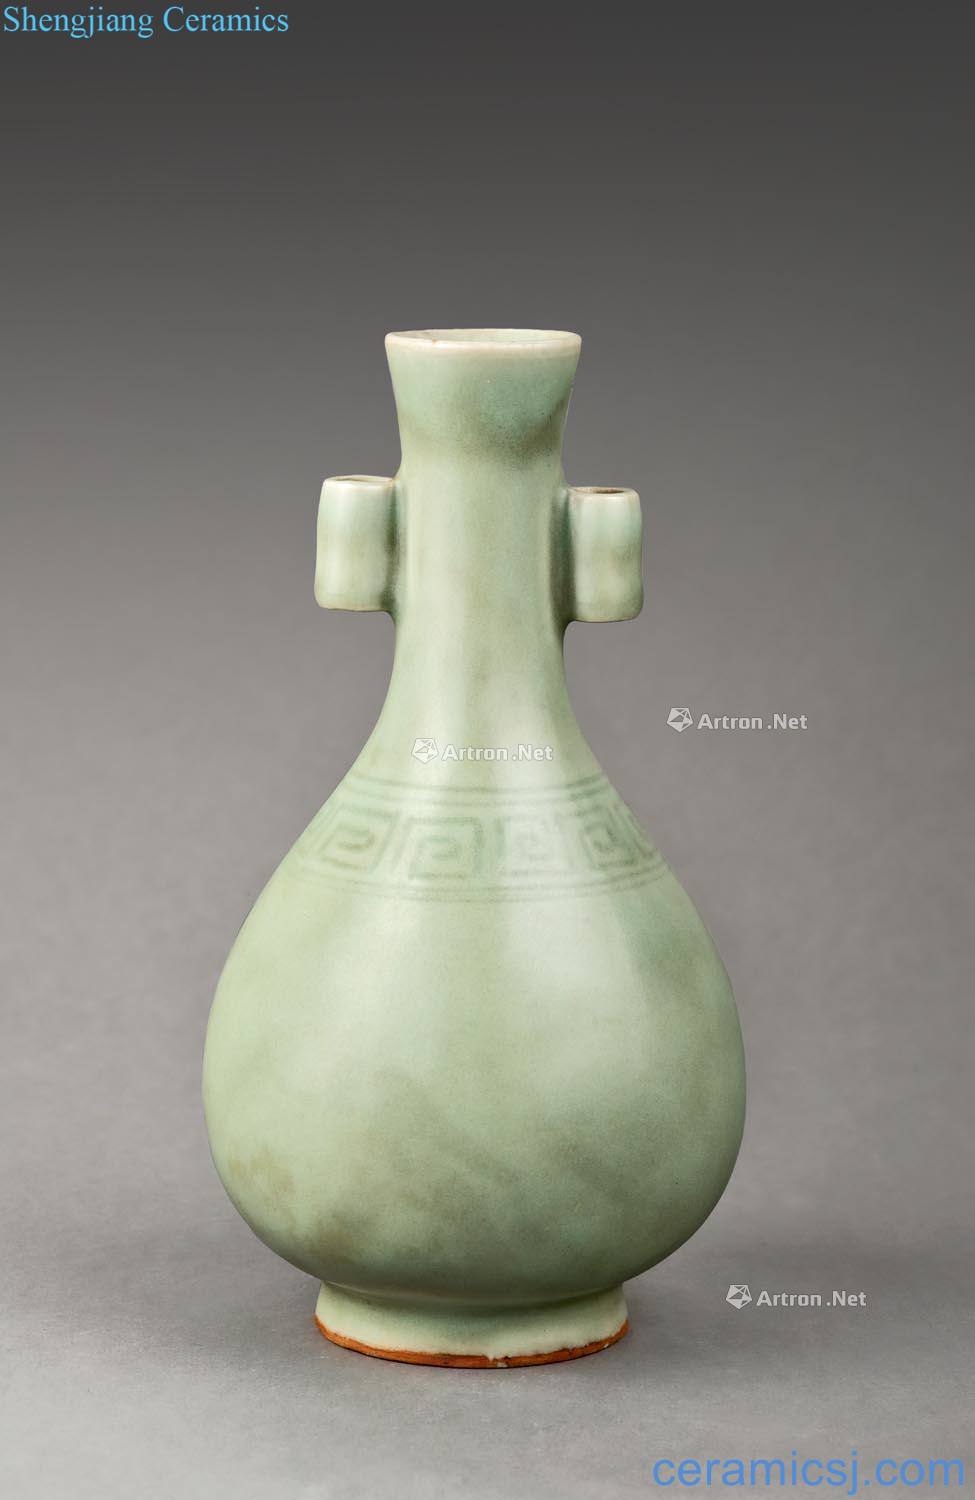 The southern song dynasty to yuan, 13 to the 14th century Longquan celadon vase